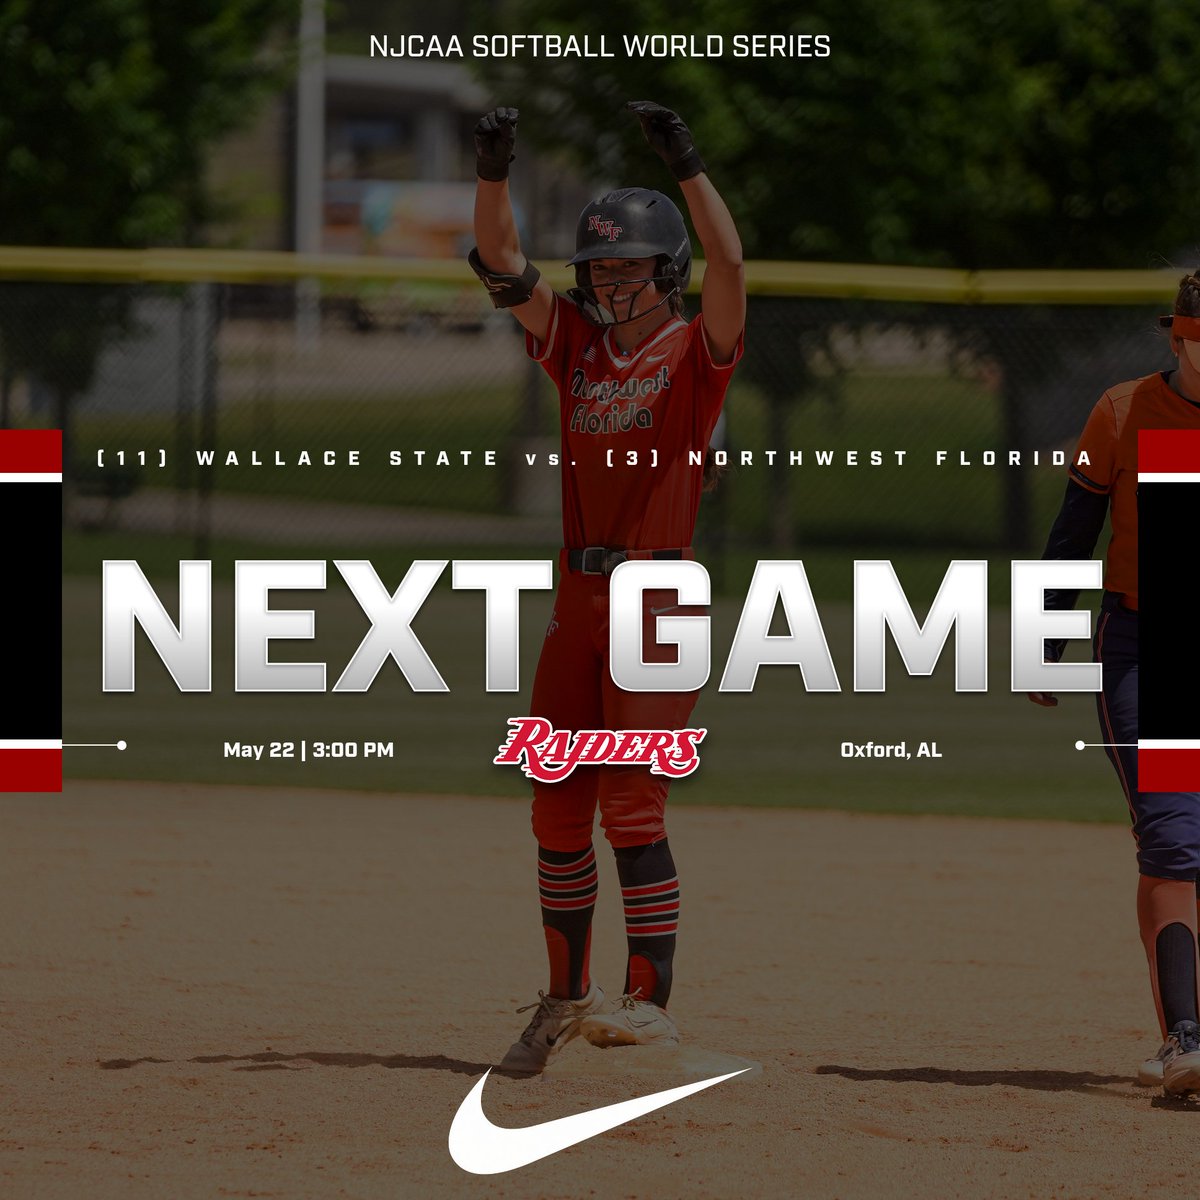 Back at it tomorrow afternoon!
 
🆚 (11) Wallace State 
🗓️ Wednesday, May 22
📍 Oxford, AL
⏰ 3:00 PM
🏟️ Choccolocco Park

#GoRaiders #SoundTheSiren